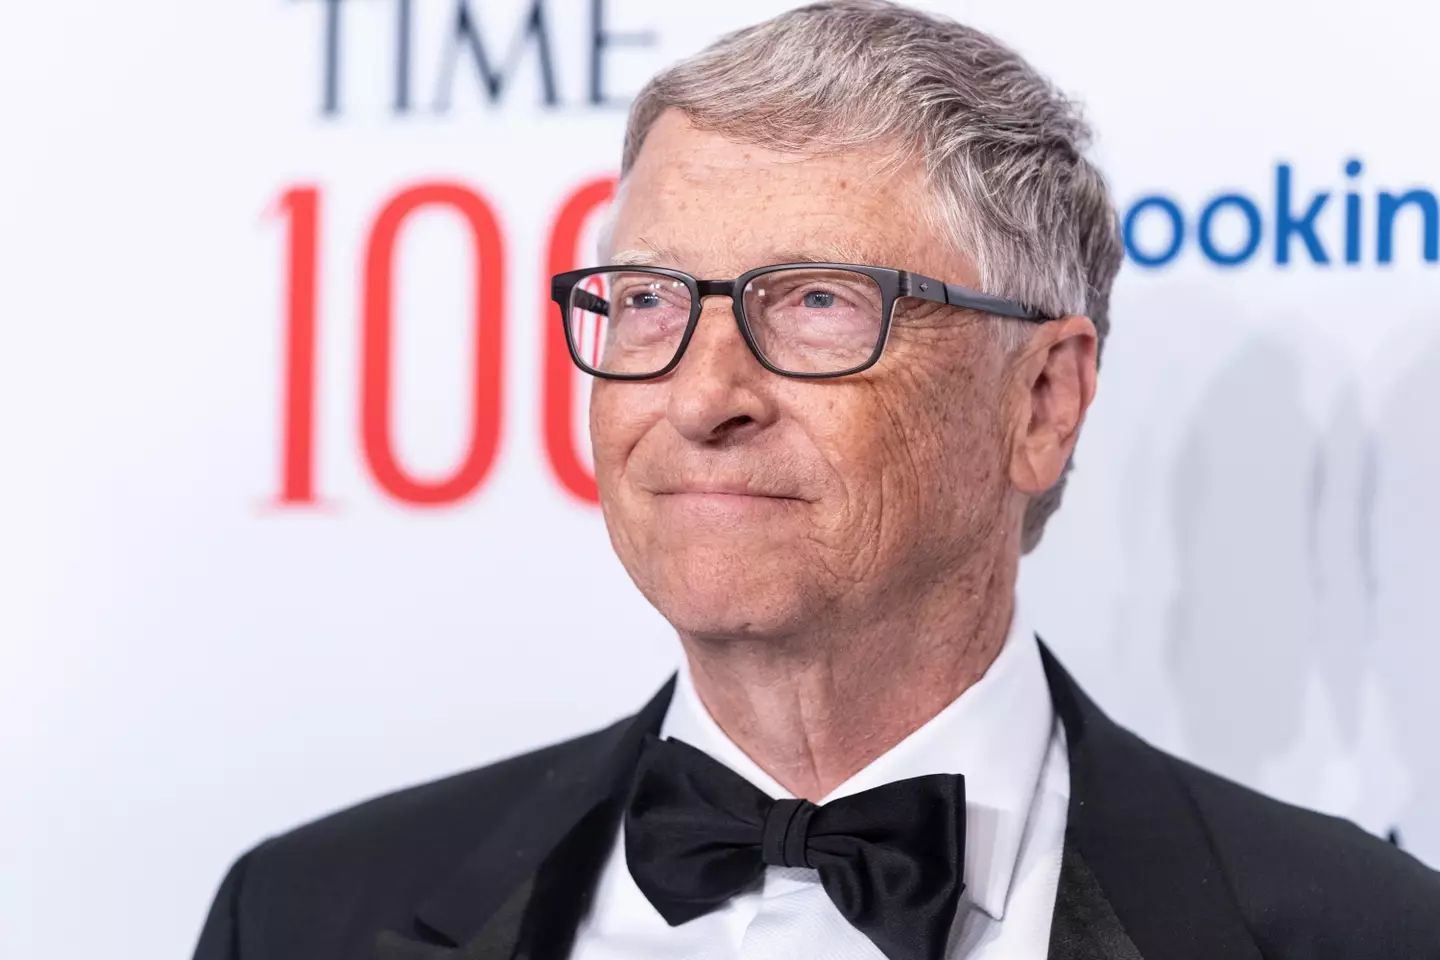 Bill Gates has been knocked off the fourth spot of the world's richest men.